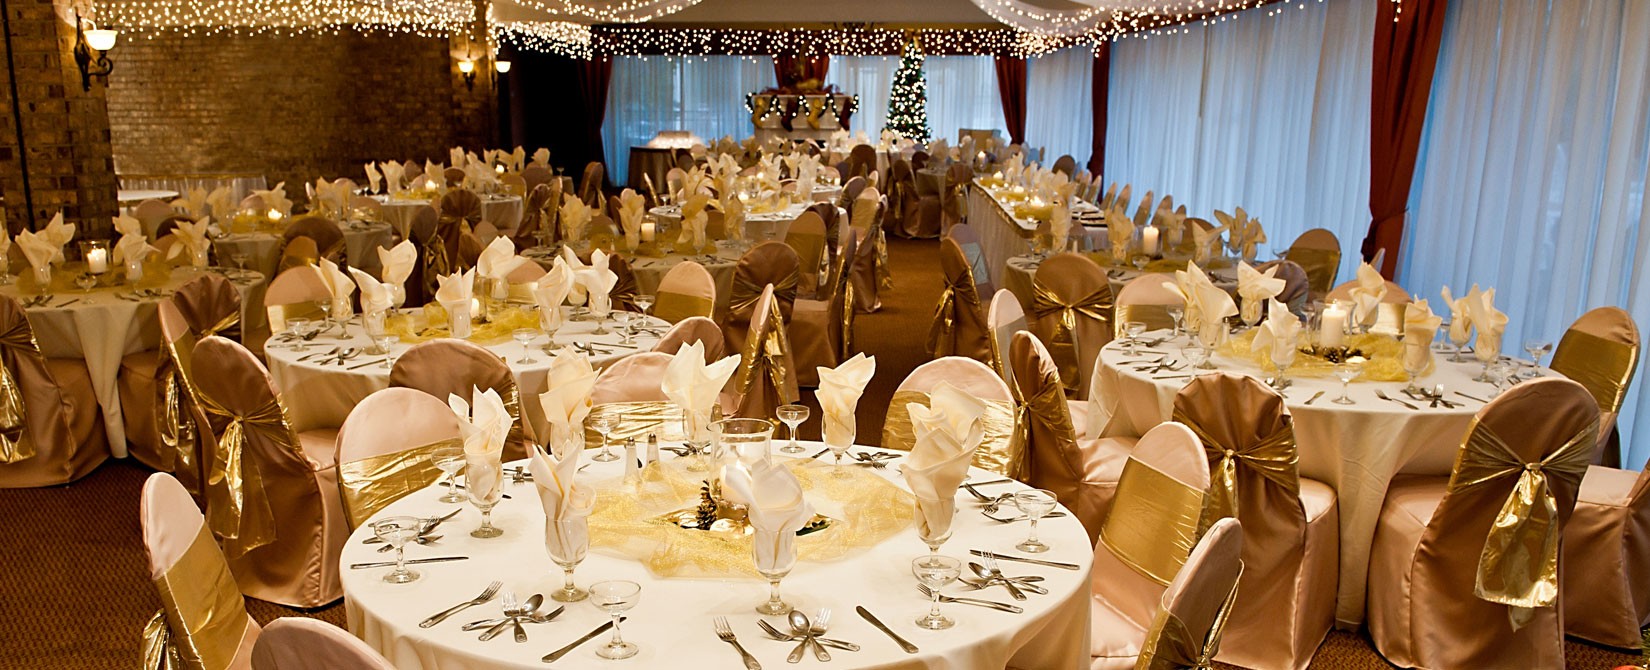 gold and white wedding place settings and decorations at Caravelle Resort